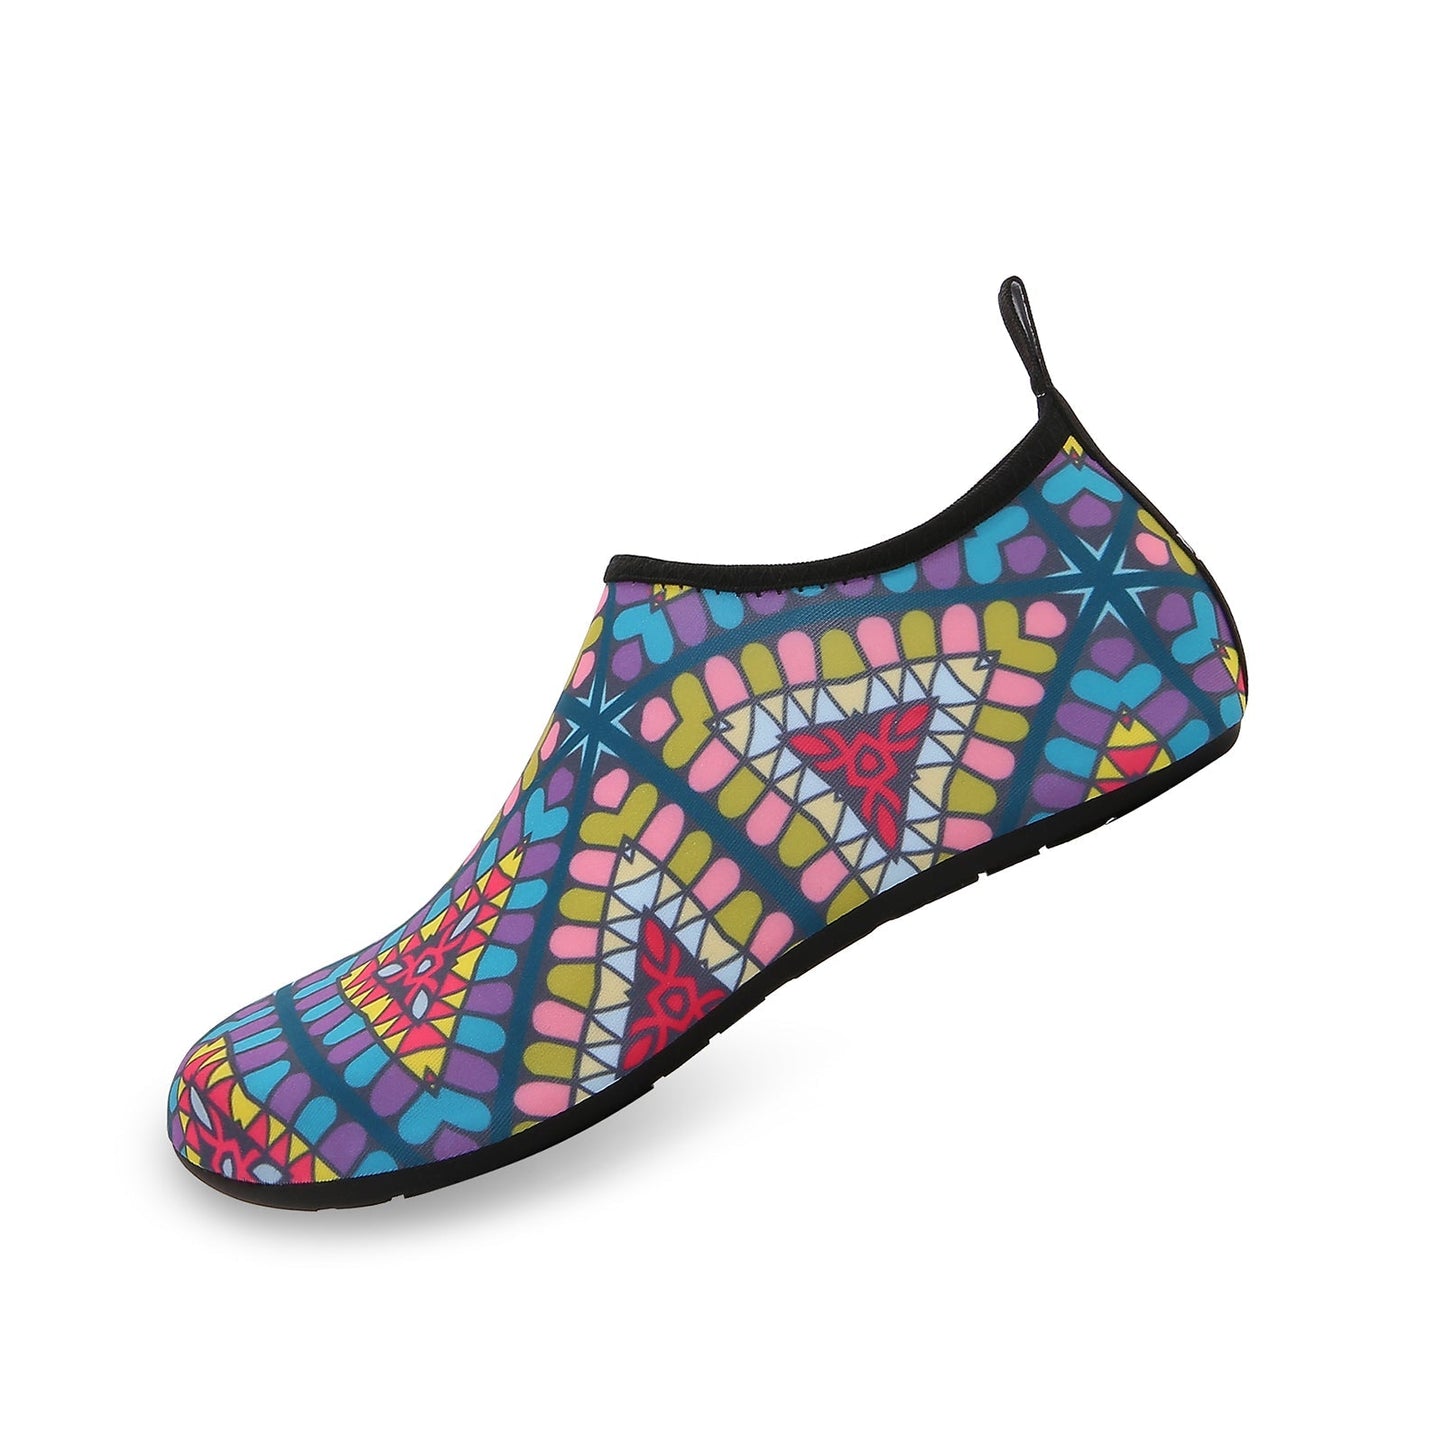 Men and Women a Slip On Barefoot Quick-Dry Beach Aqua Yoga Water Shoes (Indian Triangle/multicolor)